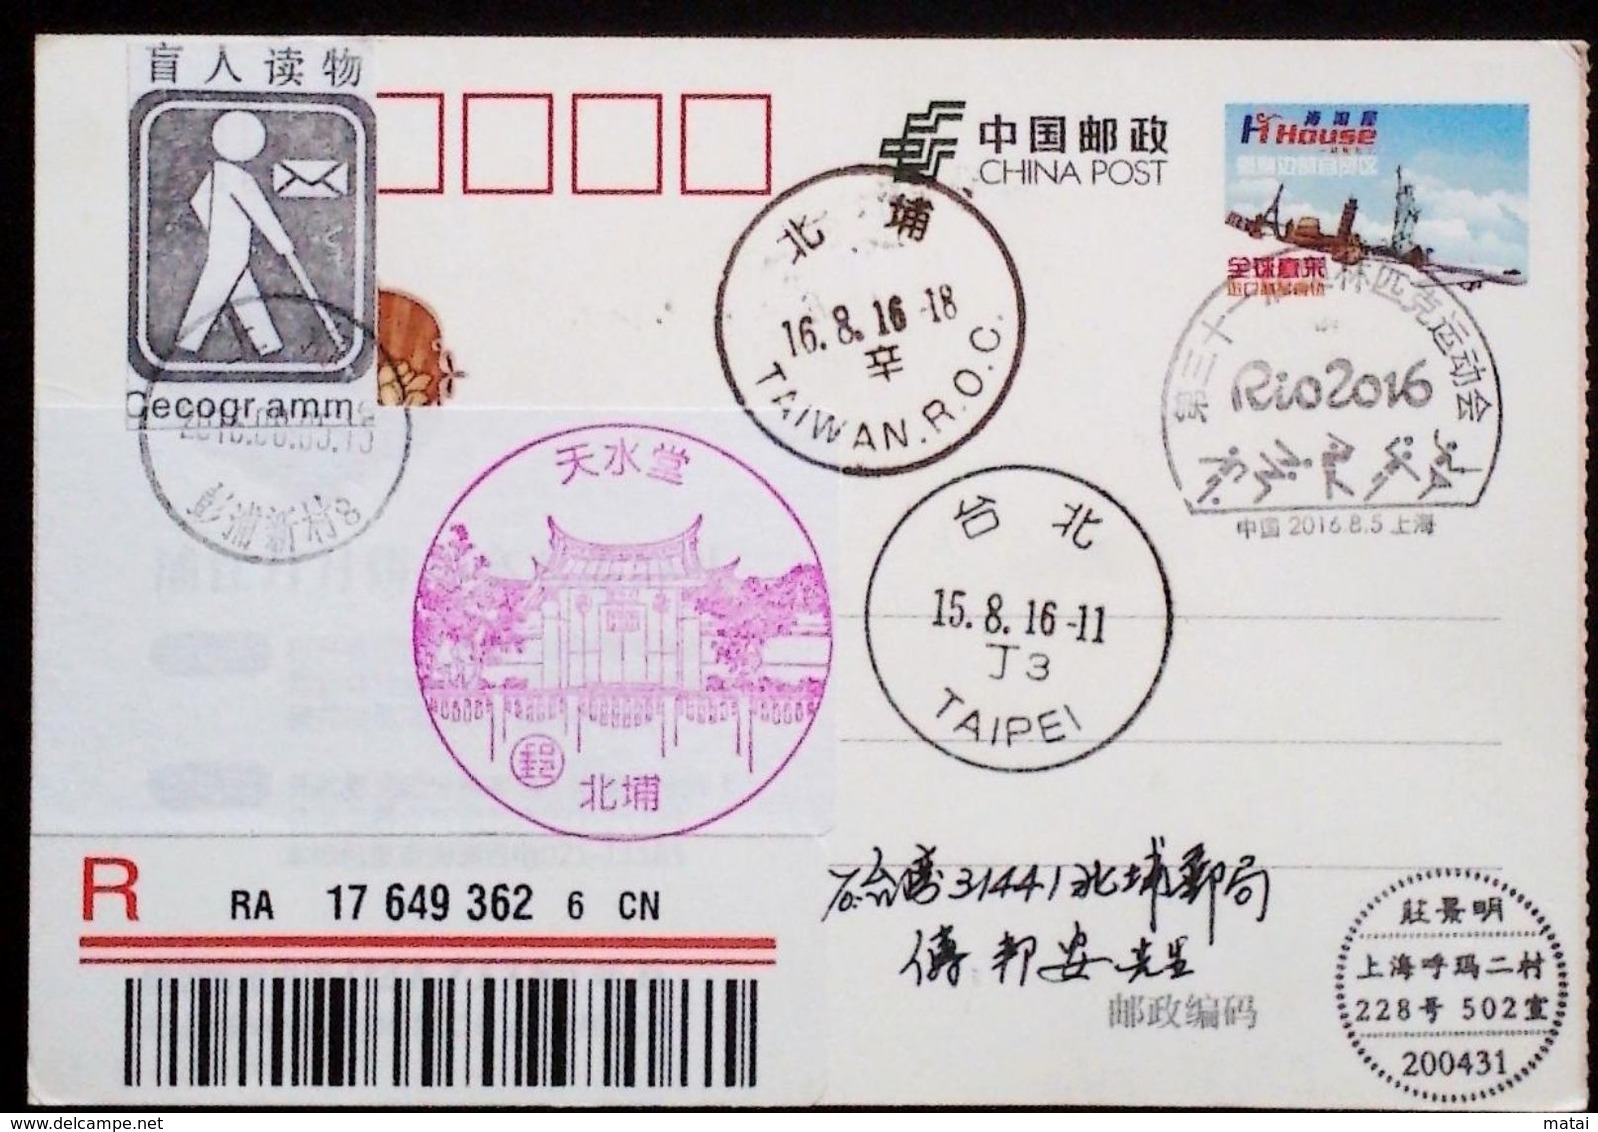 CHINA SHANGHAI TO TAIWAN LITERATURE FOR THE BLIND POSTCARD WITH CECOGR AMME LABEL & SHANGHAI & TAIWAN SCENIC POSTMARK 23 - Taiwan